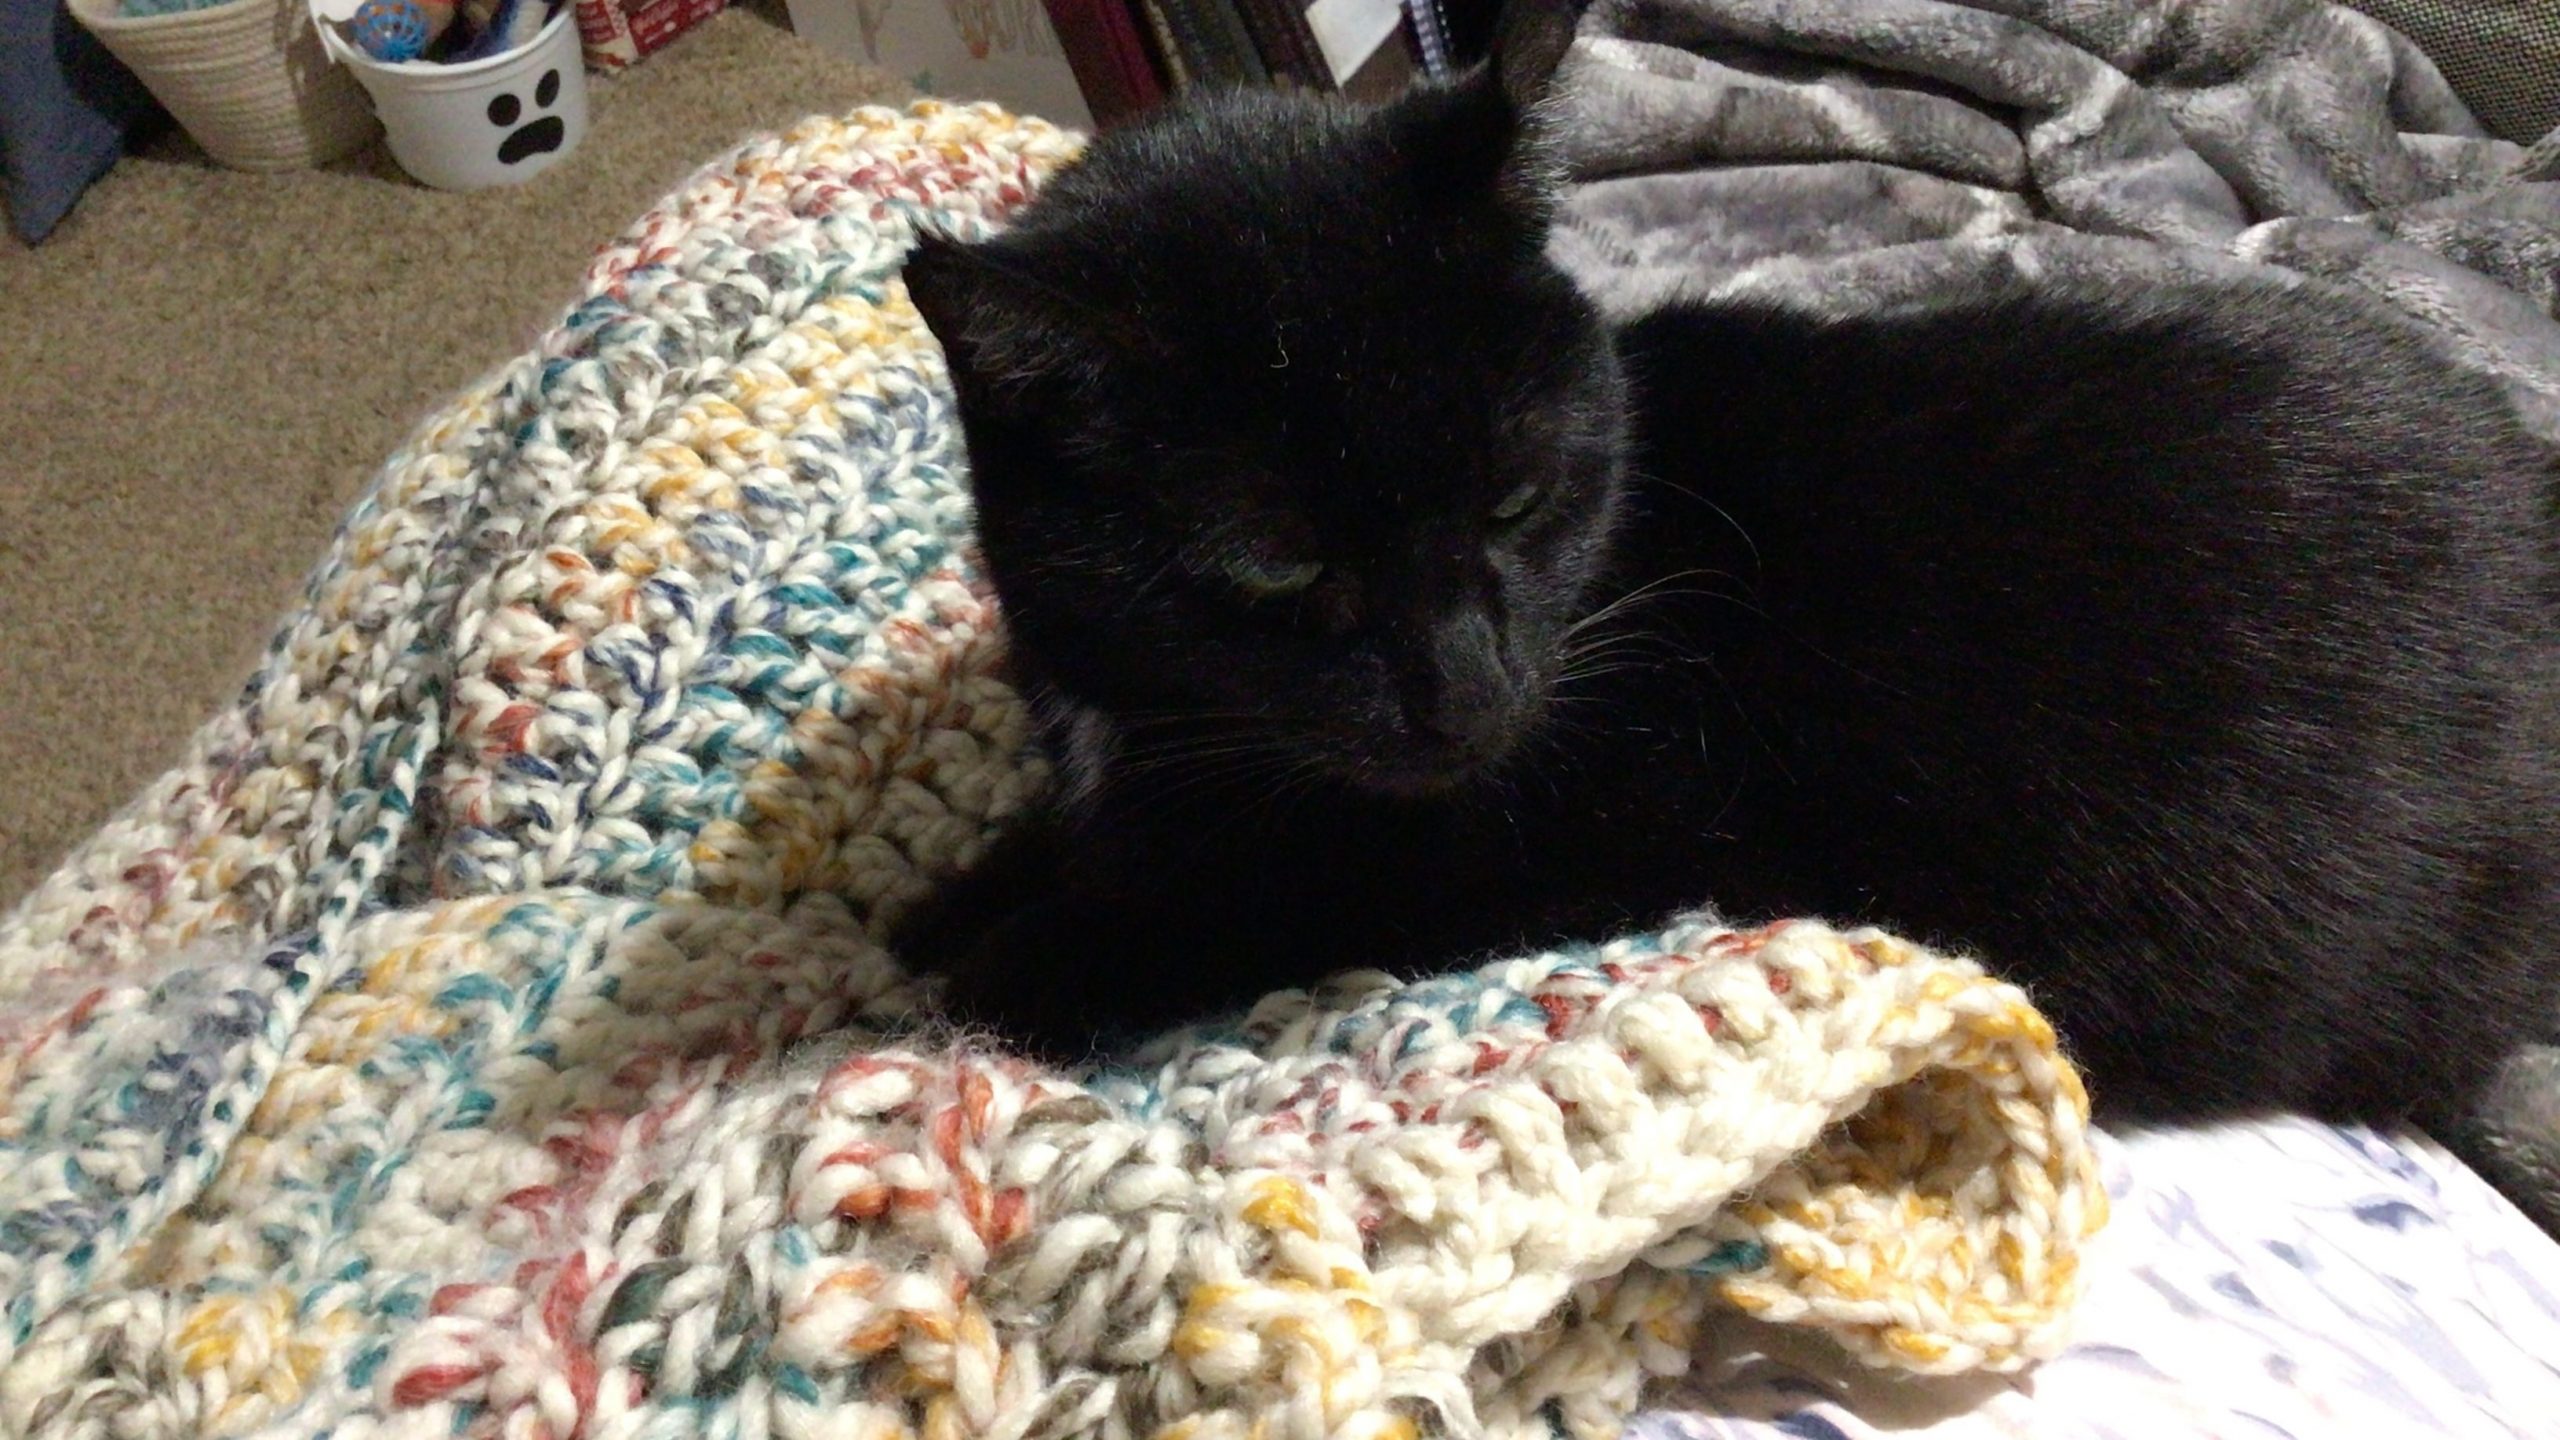 A black cat sitting primly on top of a crochet afghan